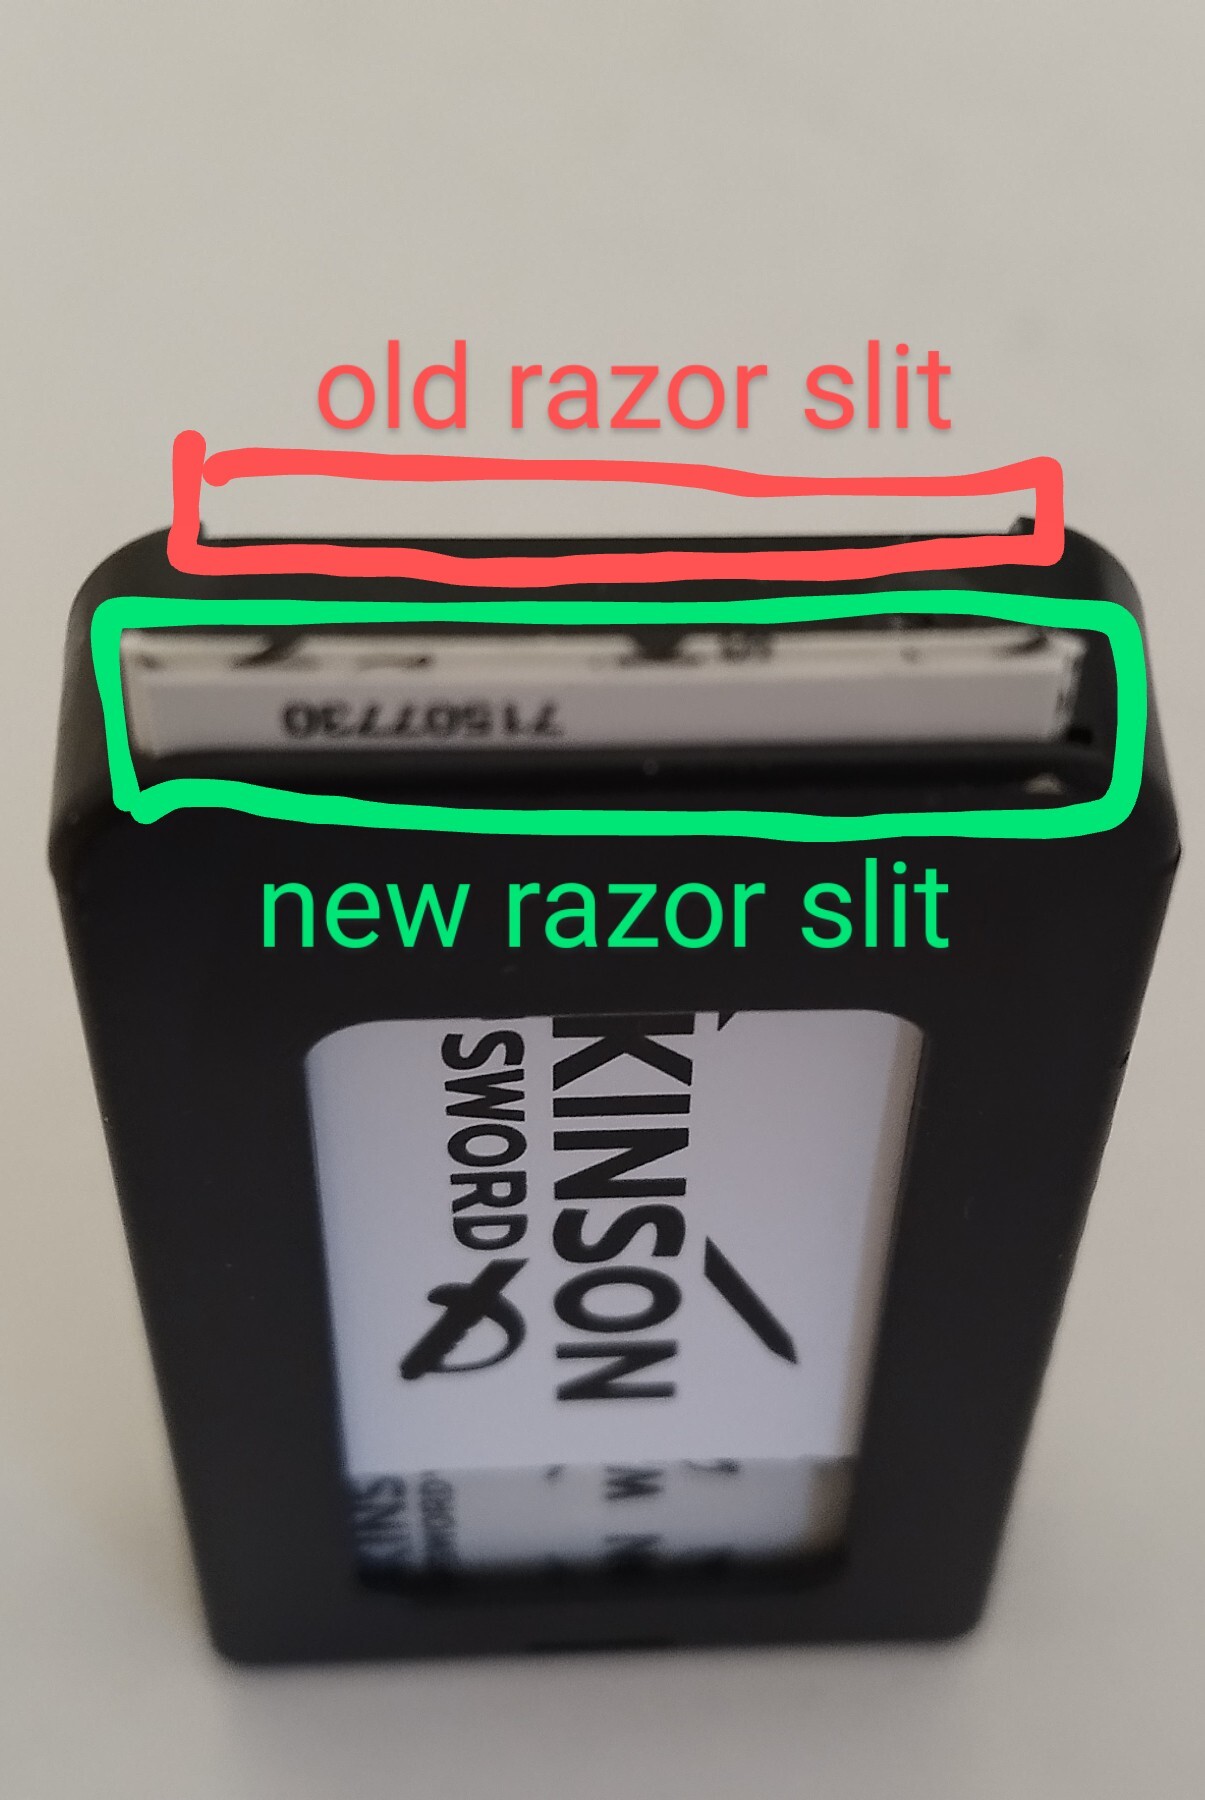 front view of razor package